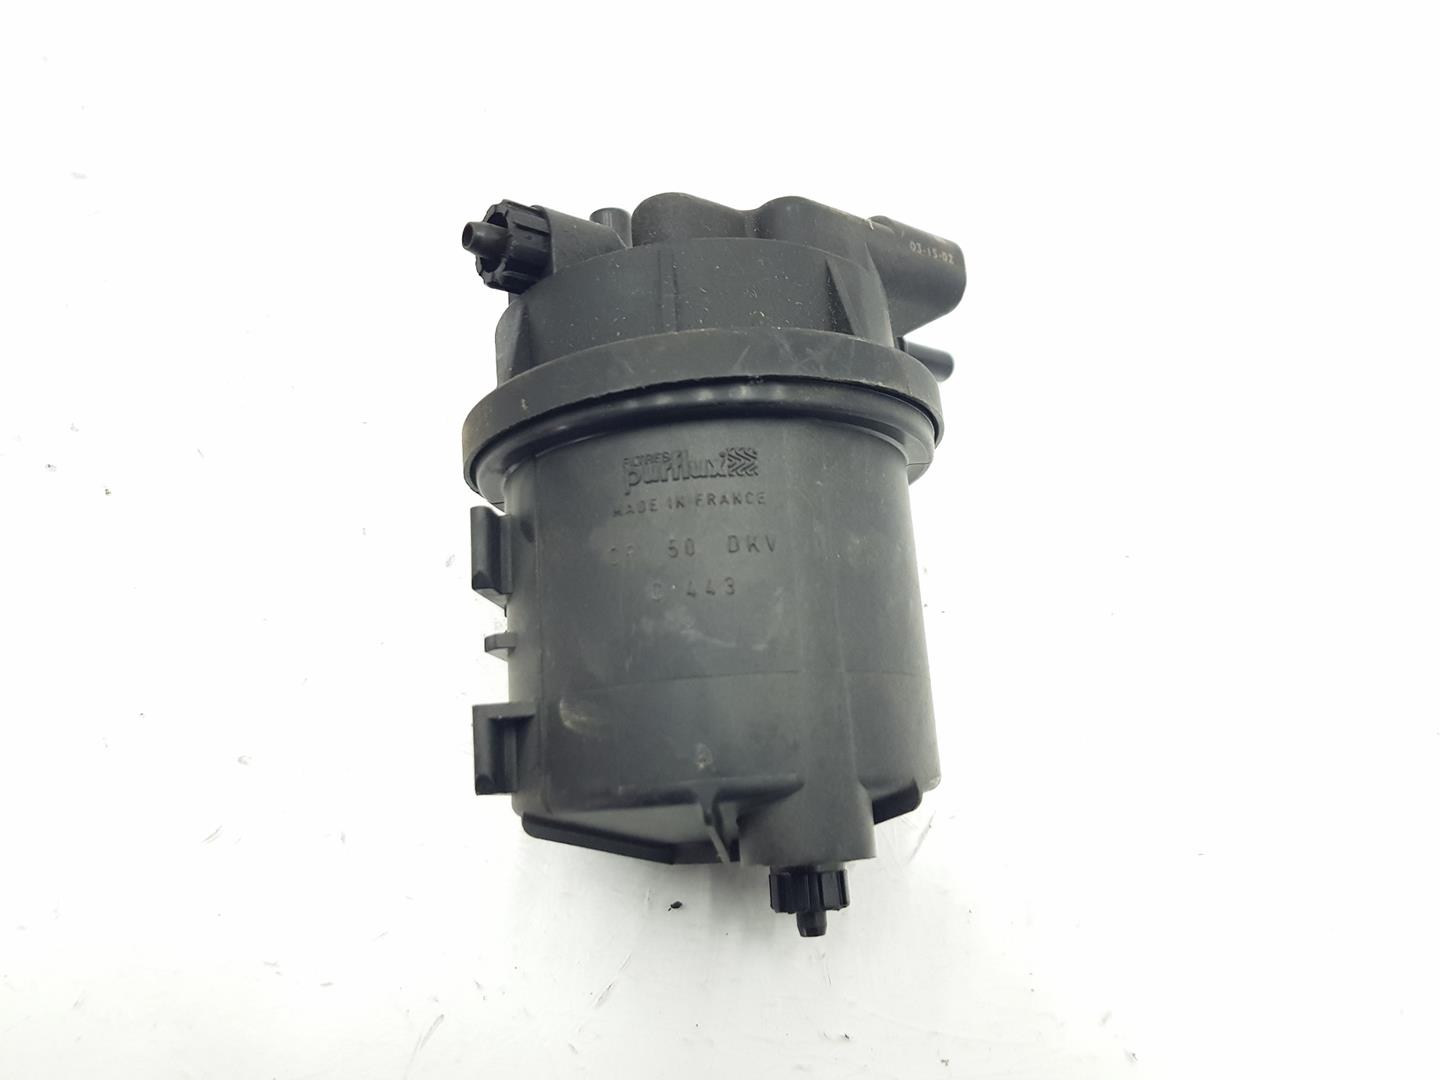 RENAULT Kangoo 1 generation (1998-2009) Other Engine Compartment Parts 7700116169, 6610964161 19808600